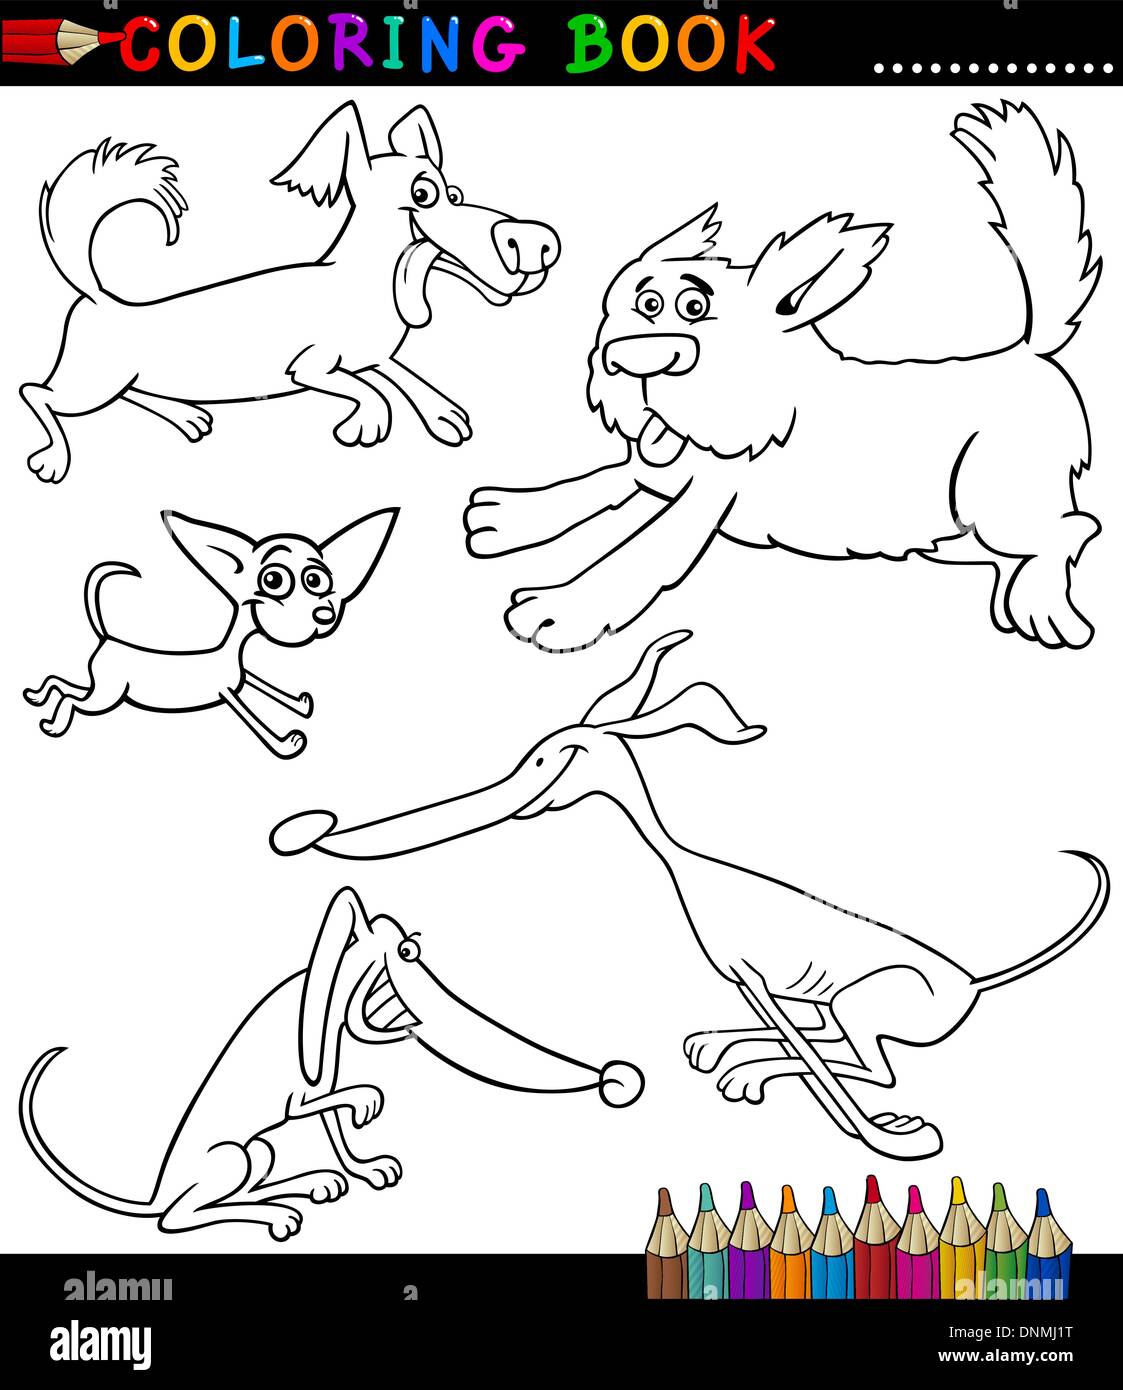 Coloring Book or Coloring Page Black and White Cartoon Illustration of Funny Playful Dogs or Puppies Stock Vector